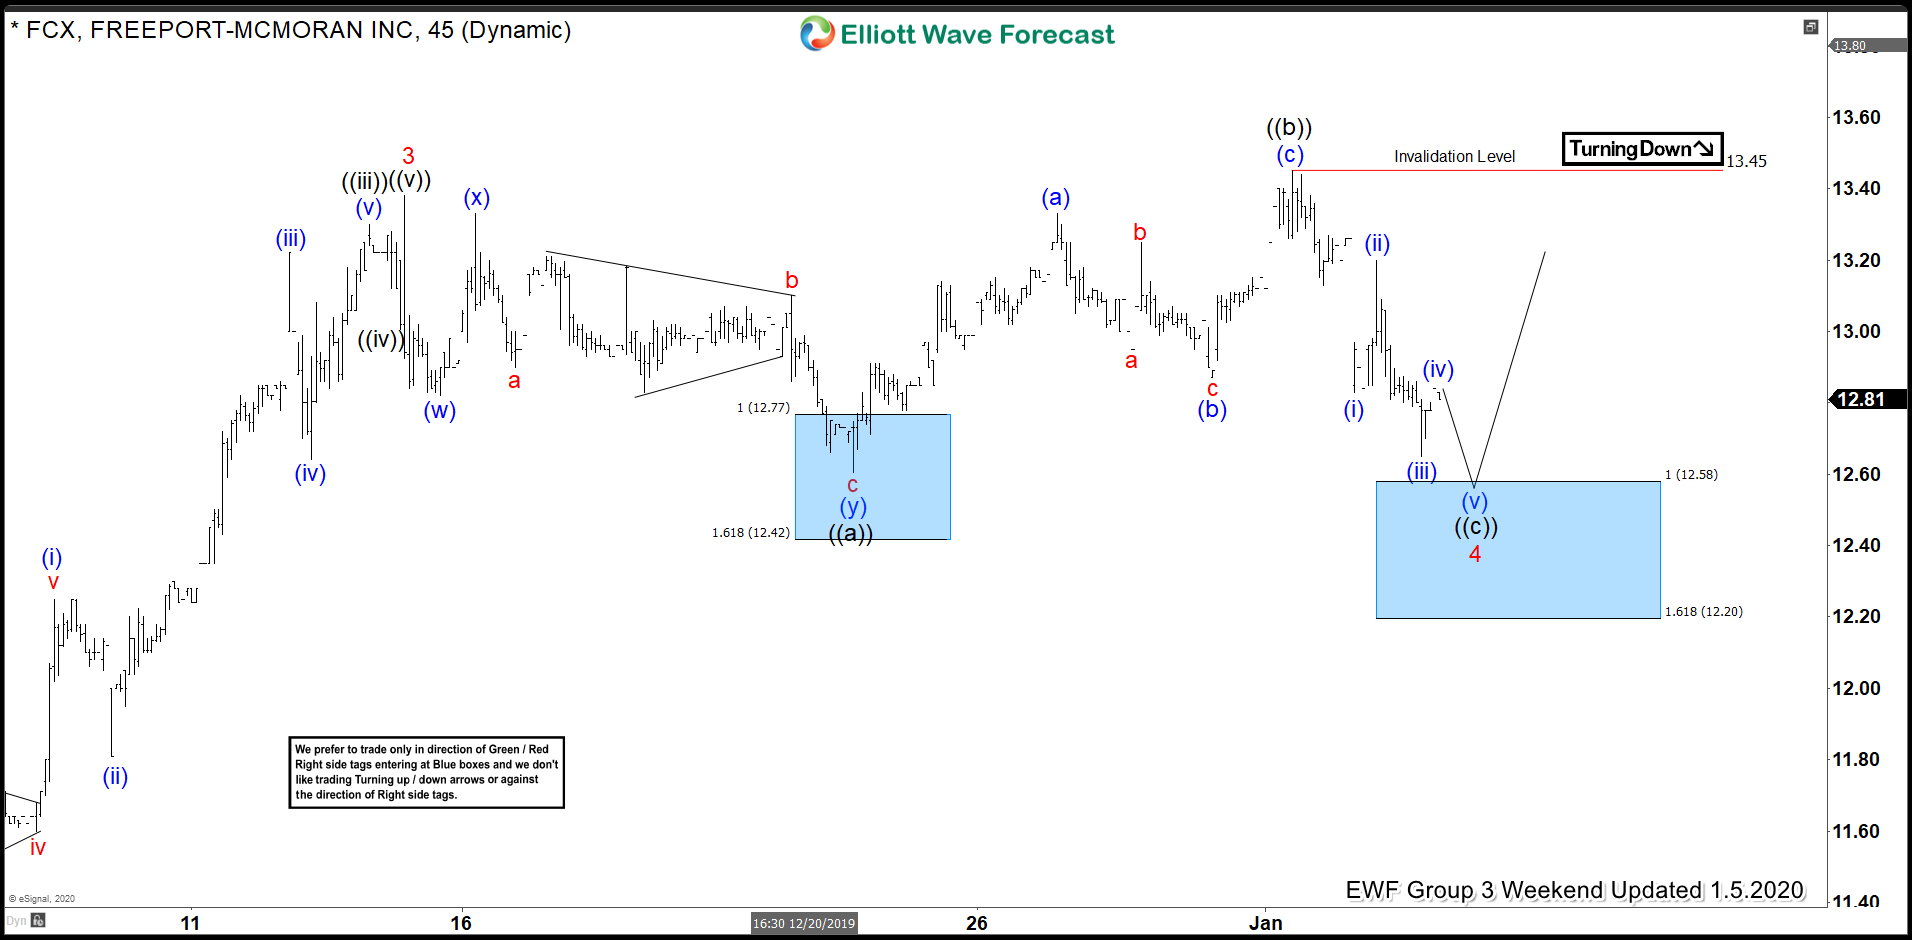 FCX Elliott Wave View: Buying The Wave 4 Pullback